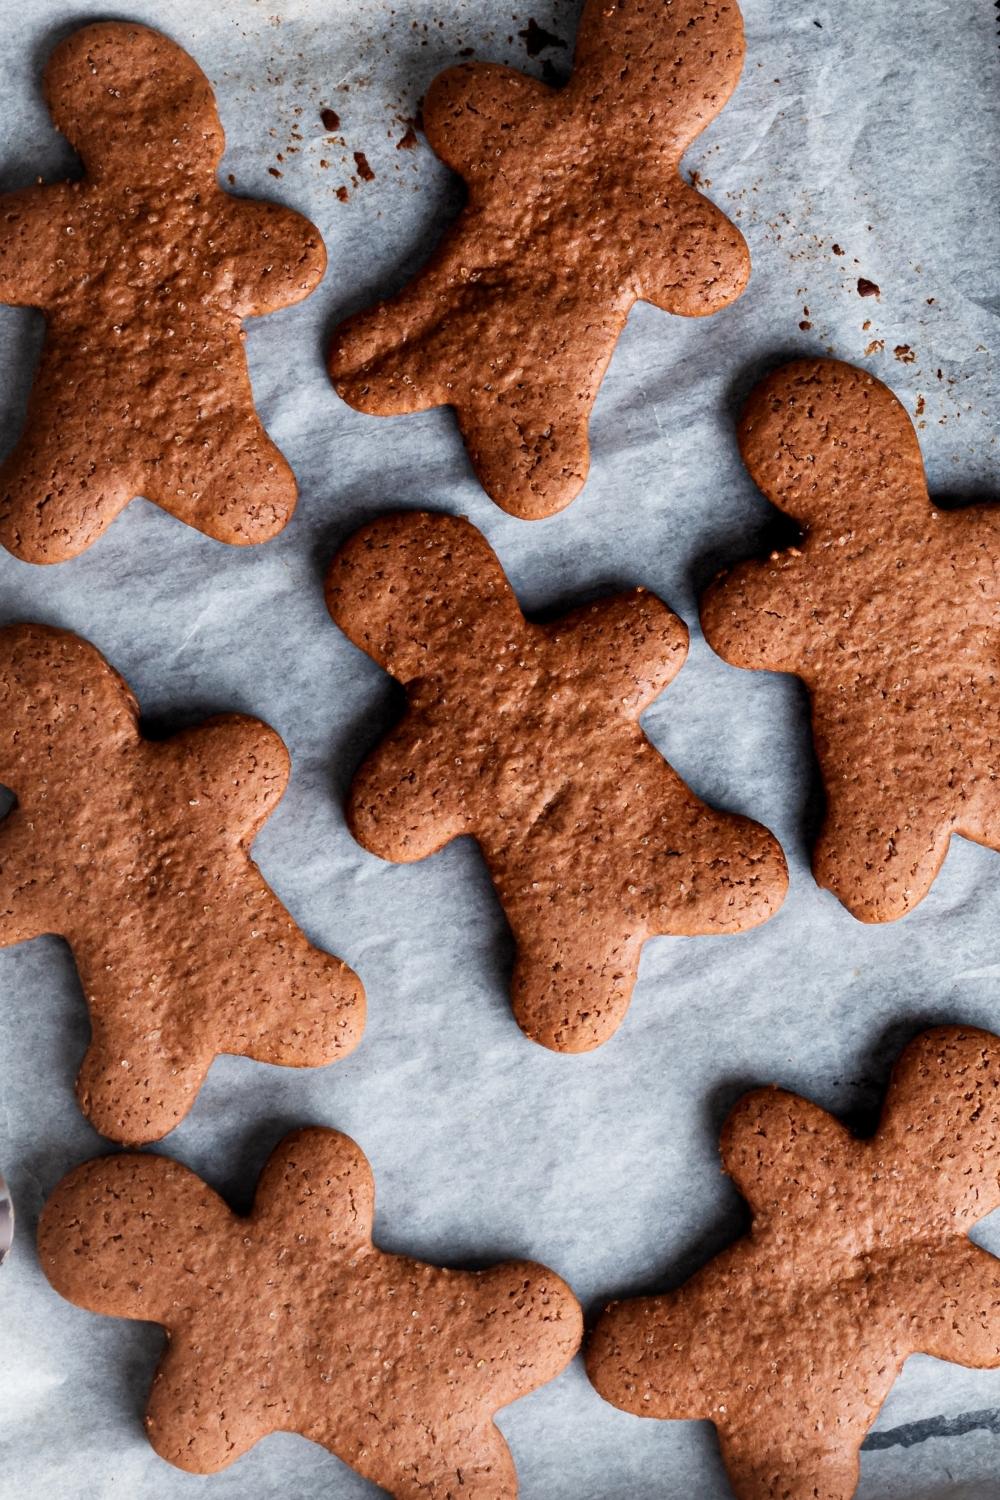 An overhead view of baked homemade gingerbread cookies on a parchment lined tray.